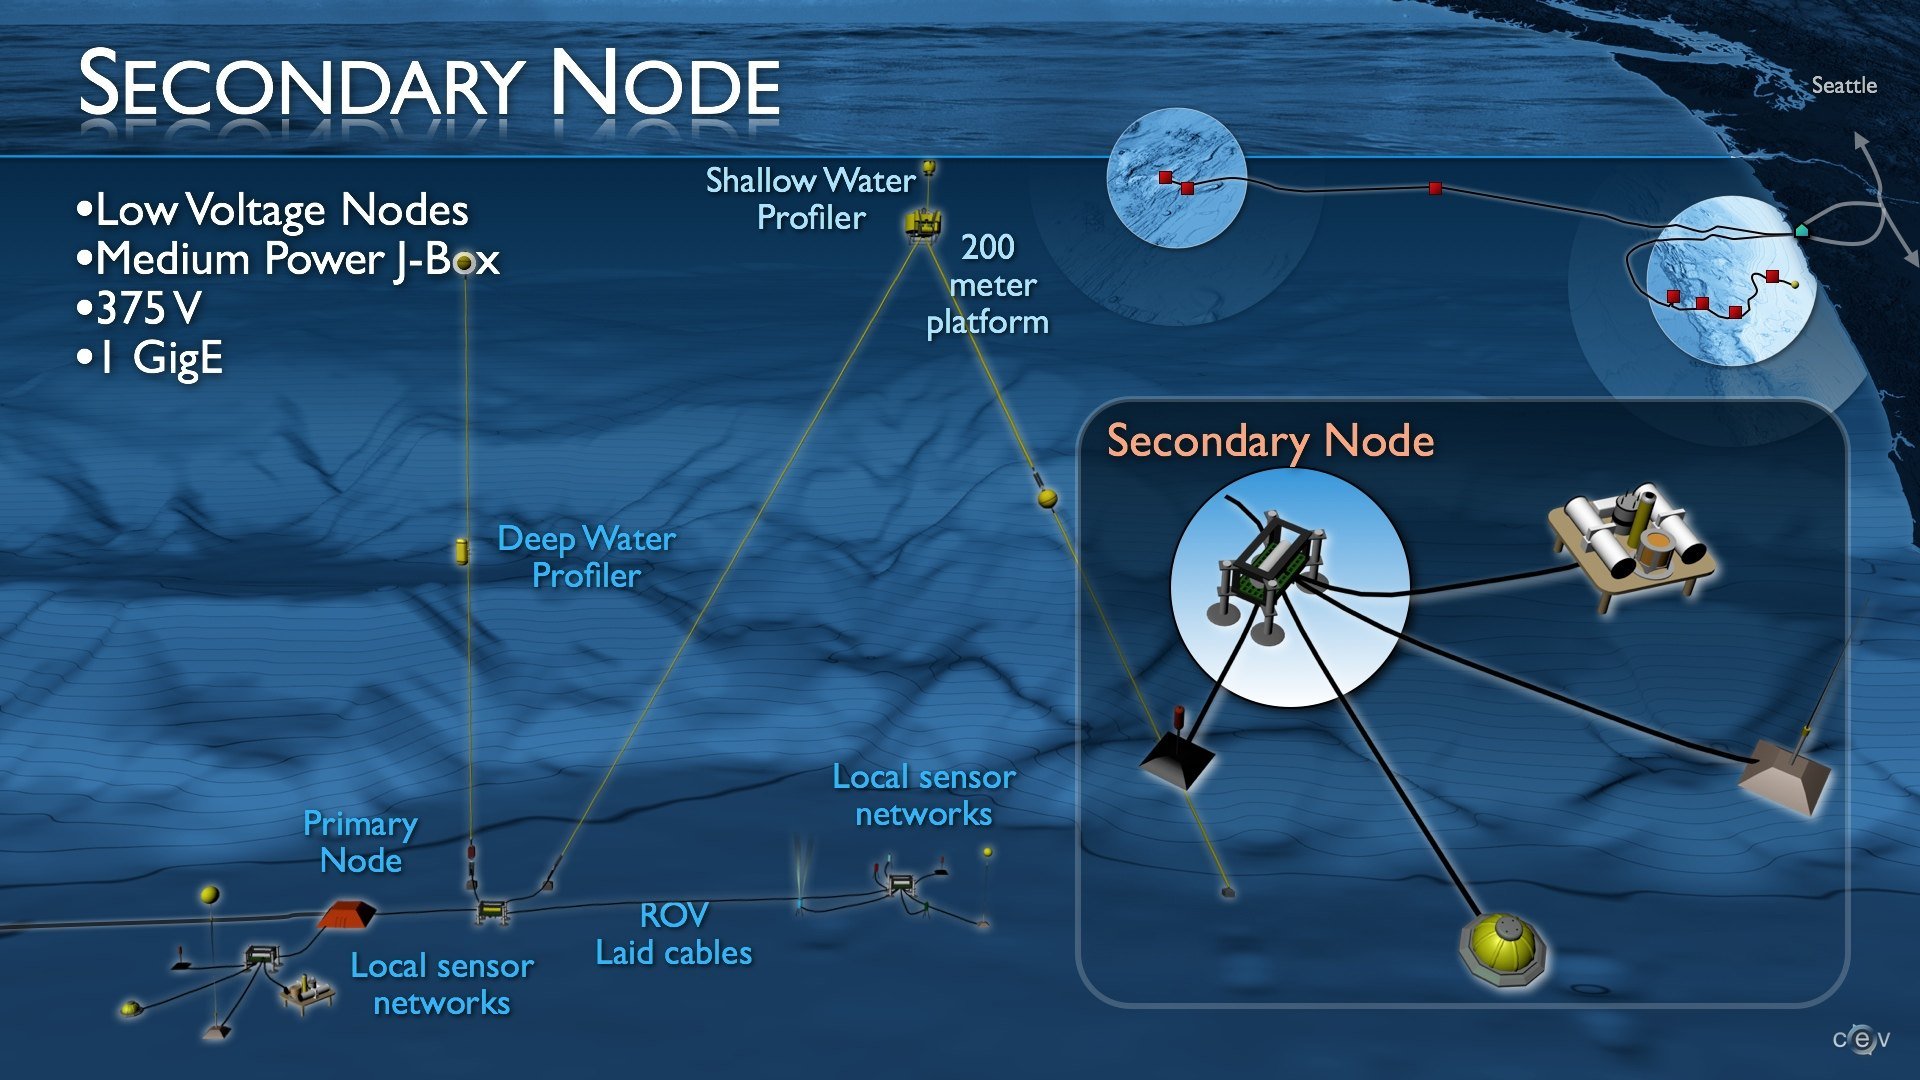 Secondary nodes will connect to the primary nodes and transfer power and bandwidth to sensor networks. They are scheduled for deployment in 2013 using an ROV. (Graphic credit: OOI RSN and Center for Environmental Visualization, University of Washington)